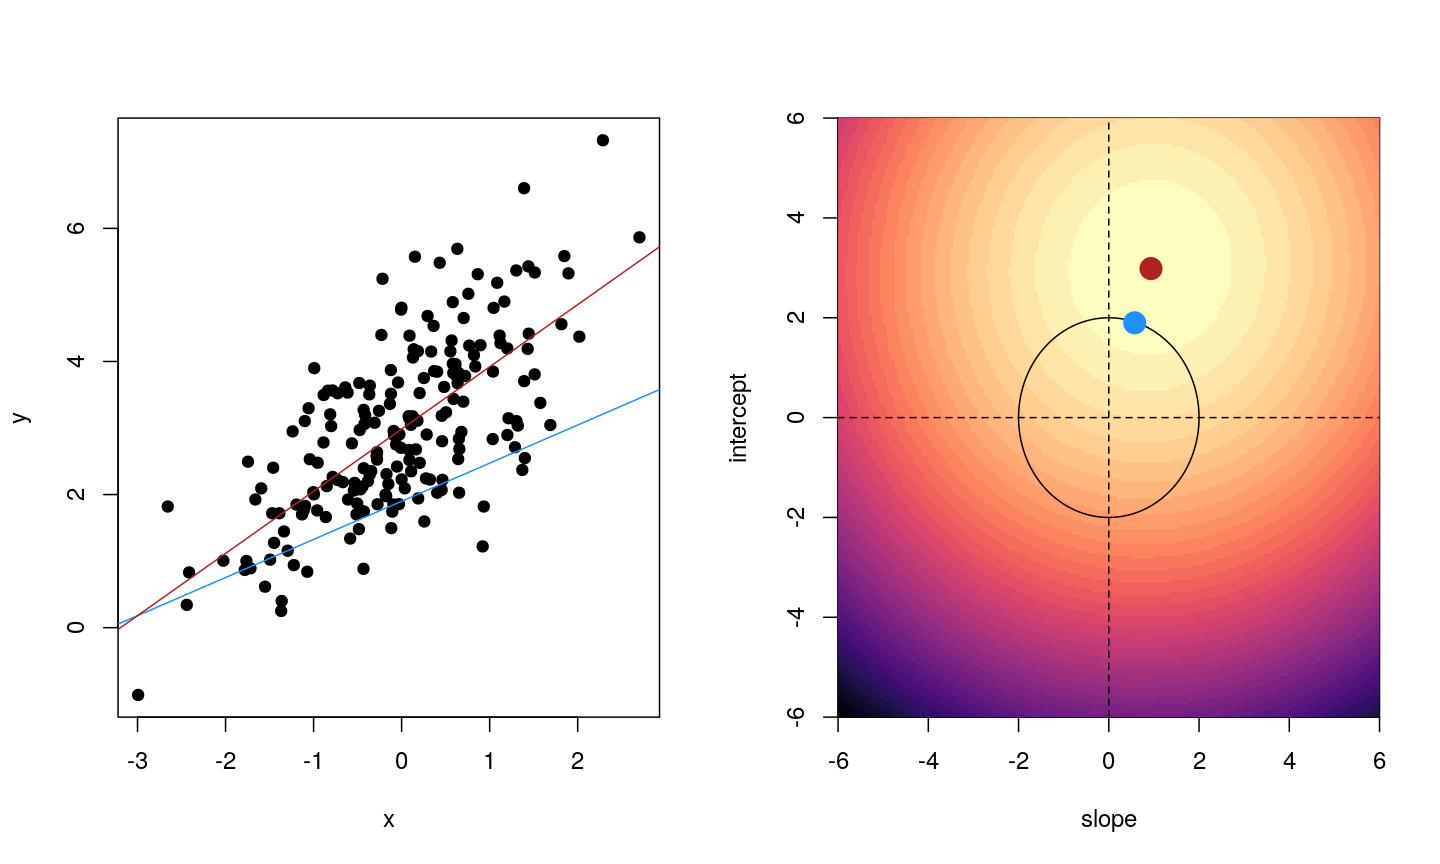 The Pearson correlation coefficients with color gradient among